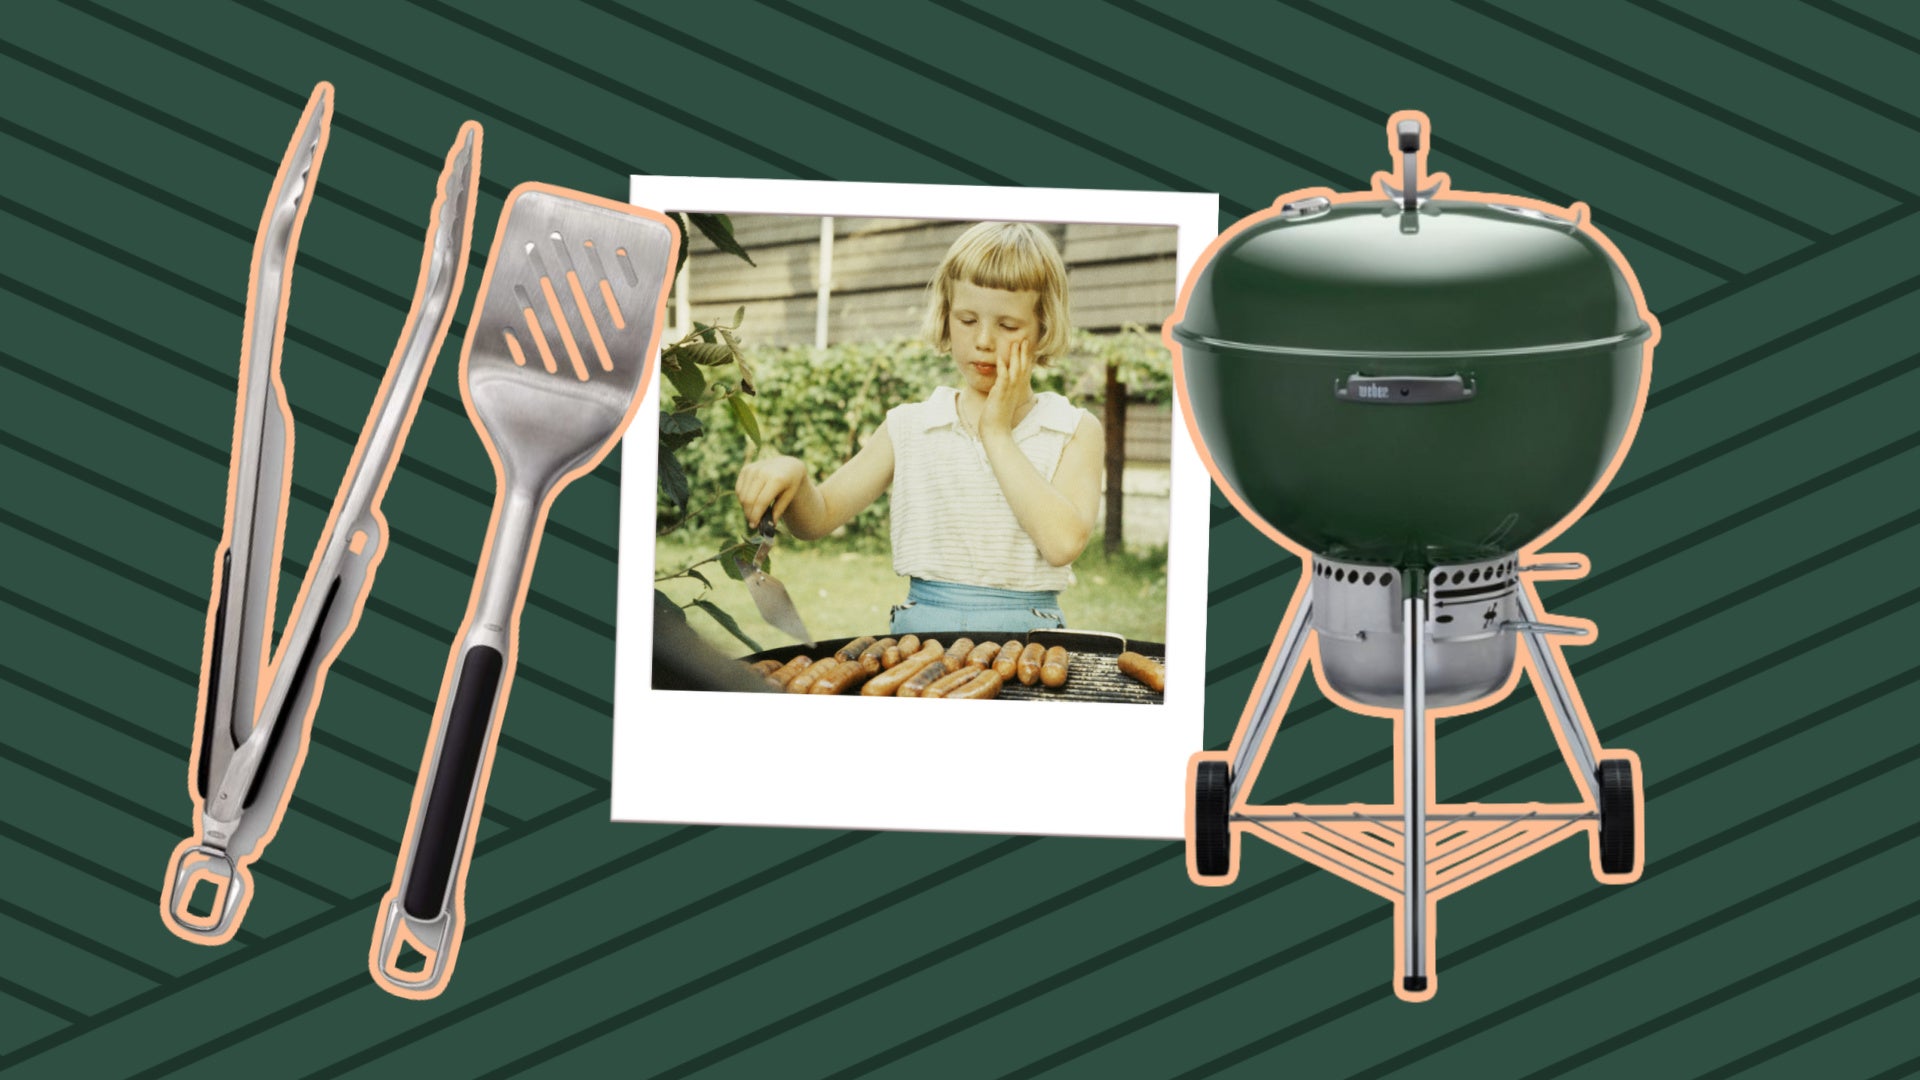 20 Grilling Tools to Make Outdoor Cooking Easier - (a)Musing Foodie